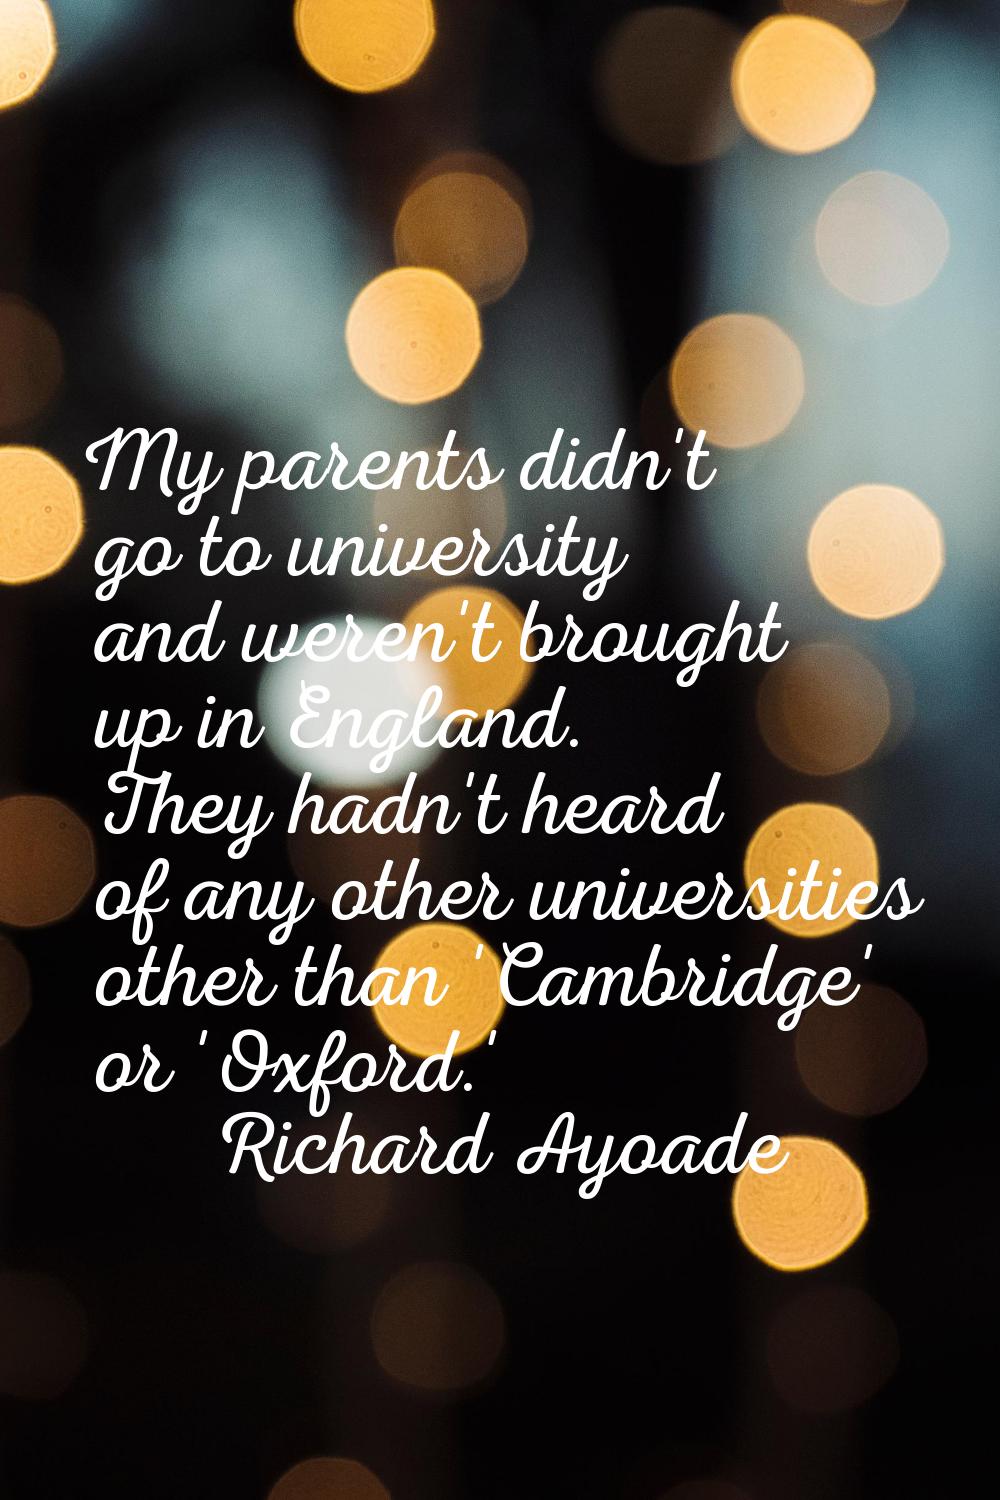 My parents didn't go to university and weren't brought up in England. They hadn't heard of any othe